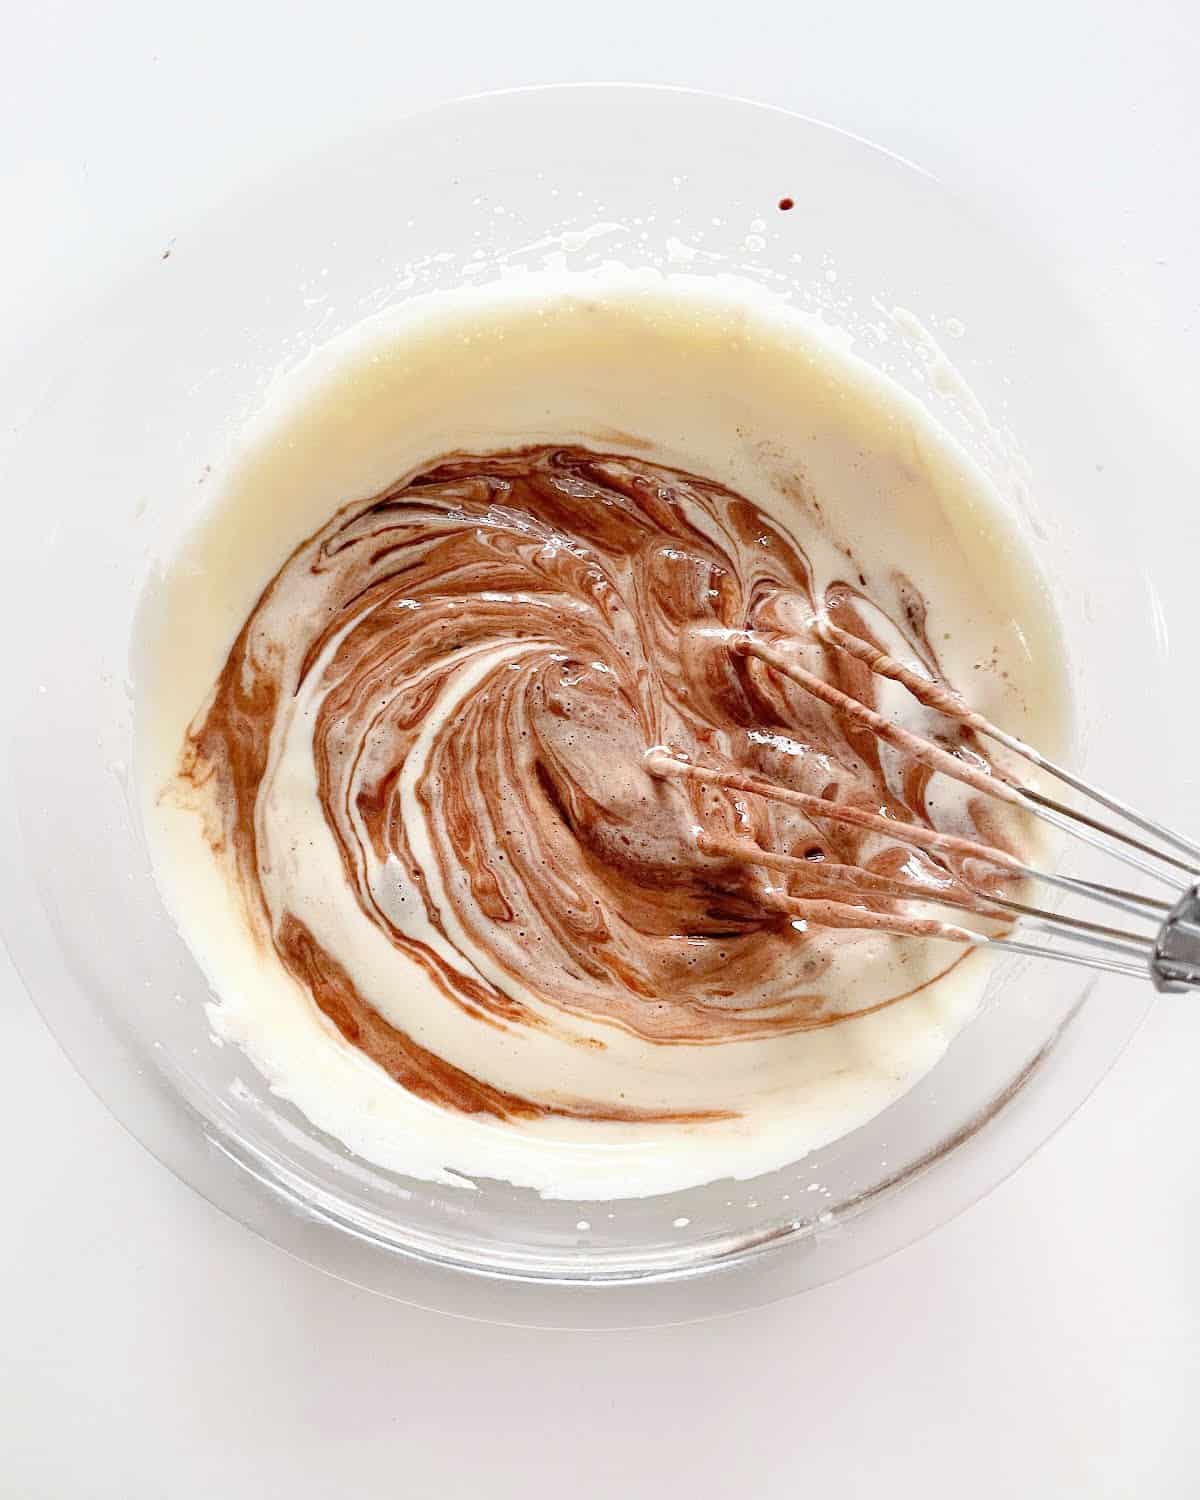 Chocolate and whitish mixture being stirred in a glass bowl with a whisk. White surface.